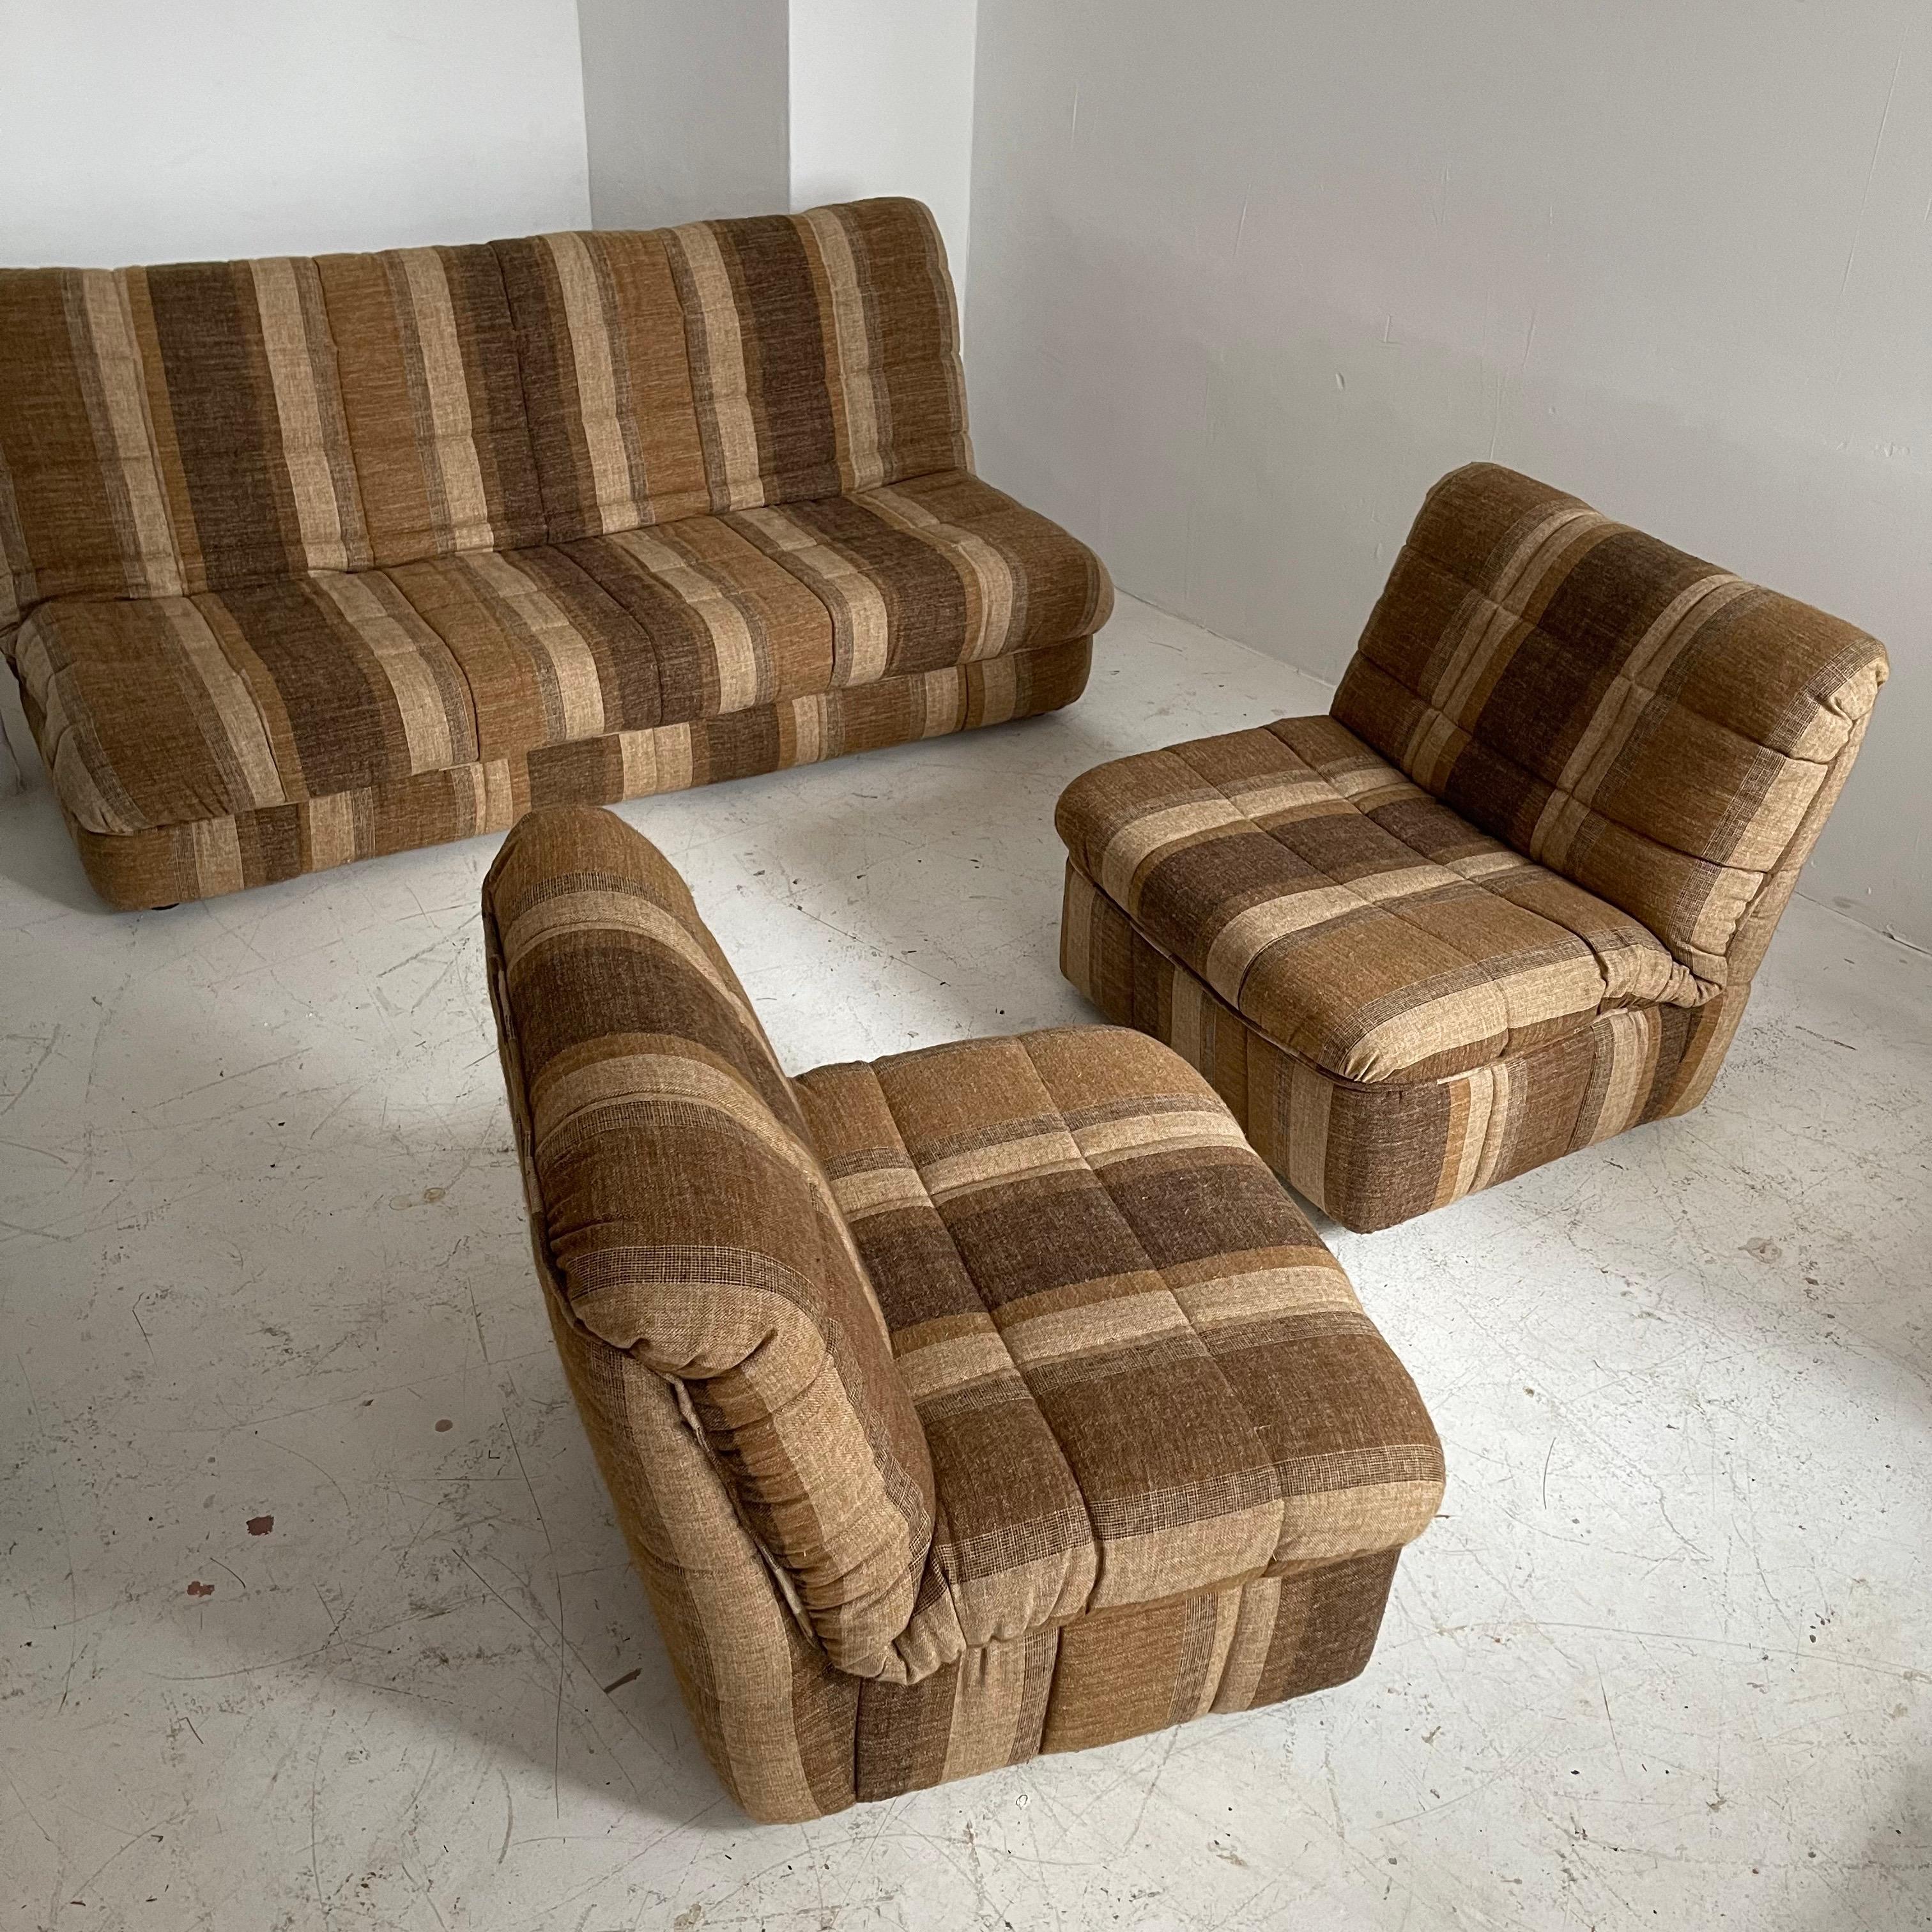 Cinna / Ligne Roset daybed lounge chairs GAO Design Jean Paul Laloy, France 1975. Sold as a set of three.